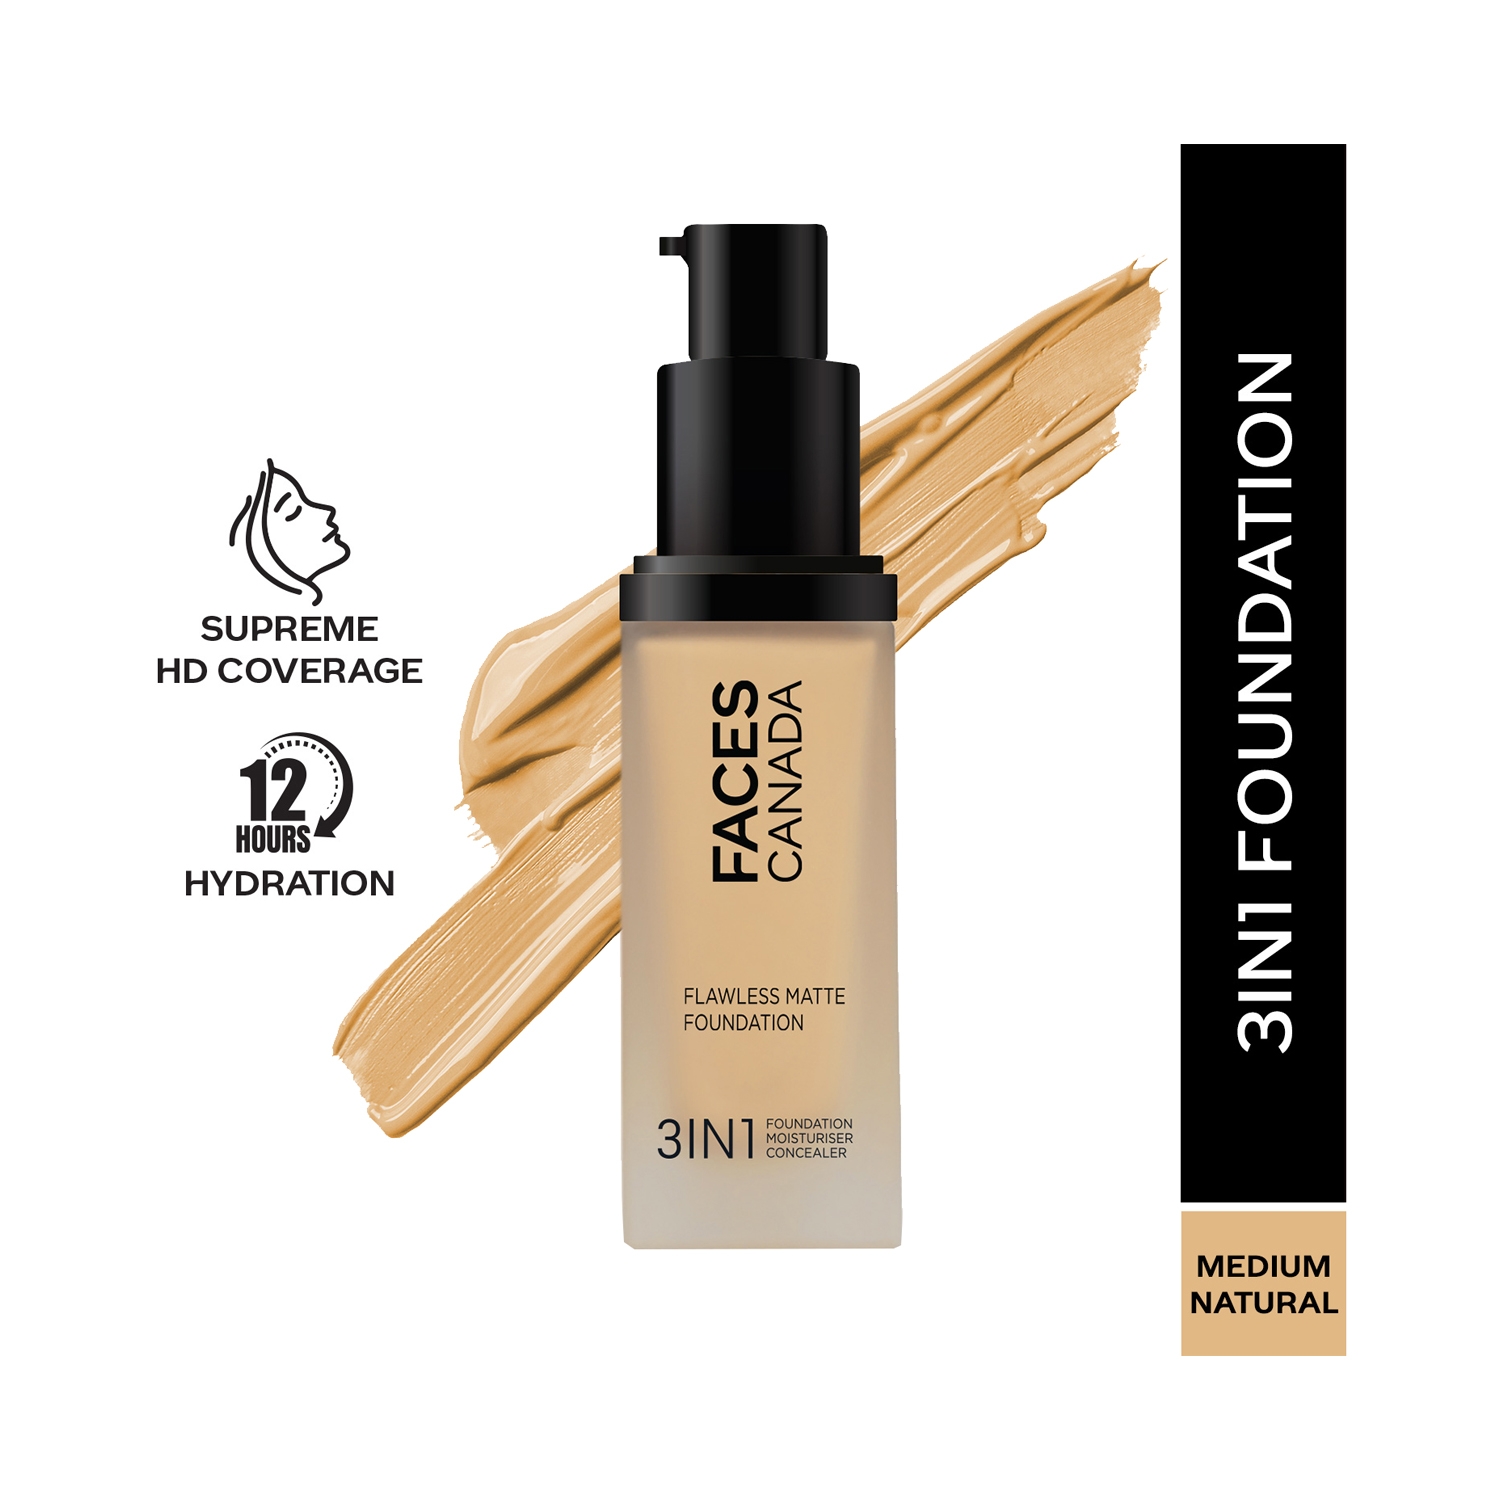 Faces Canada | Faces Canada 3-In-1 Flawless Matte Foundation SPF 18 - 022 Medium Natural (30ml)